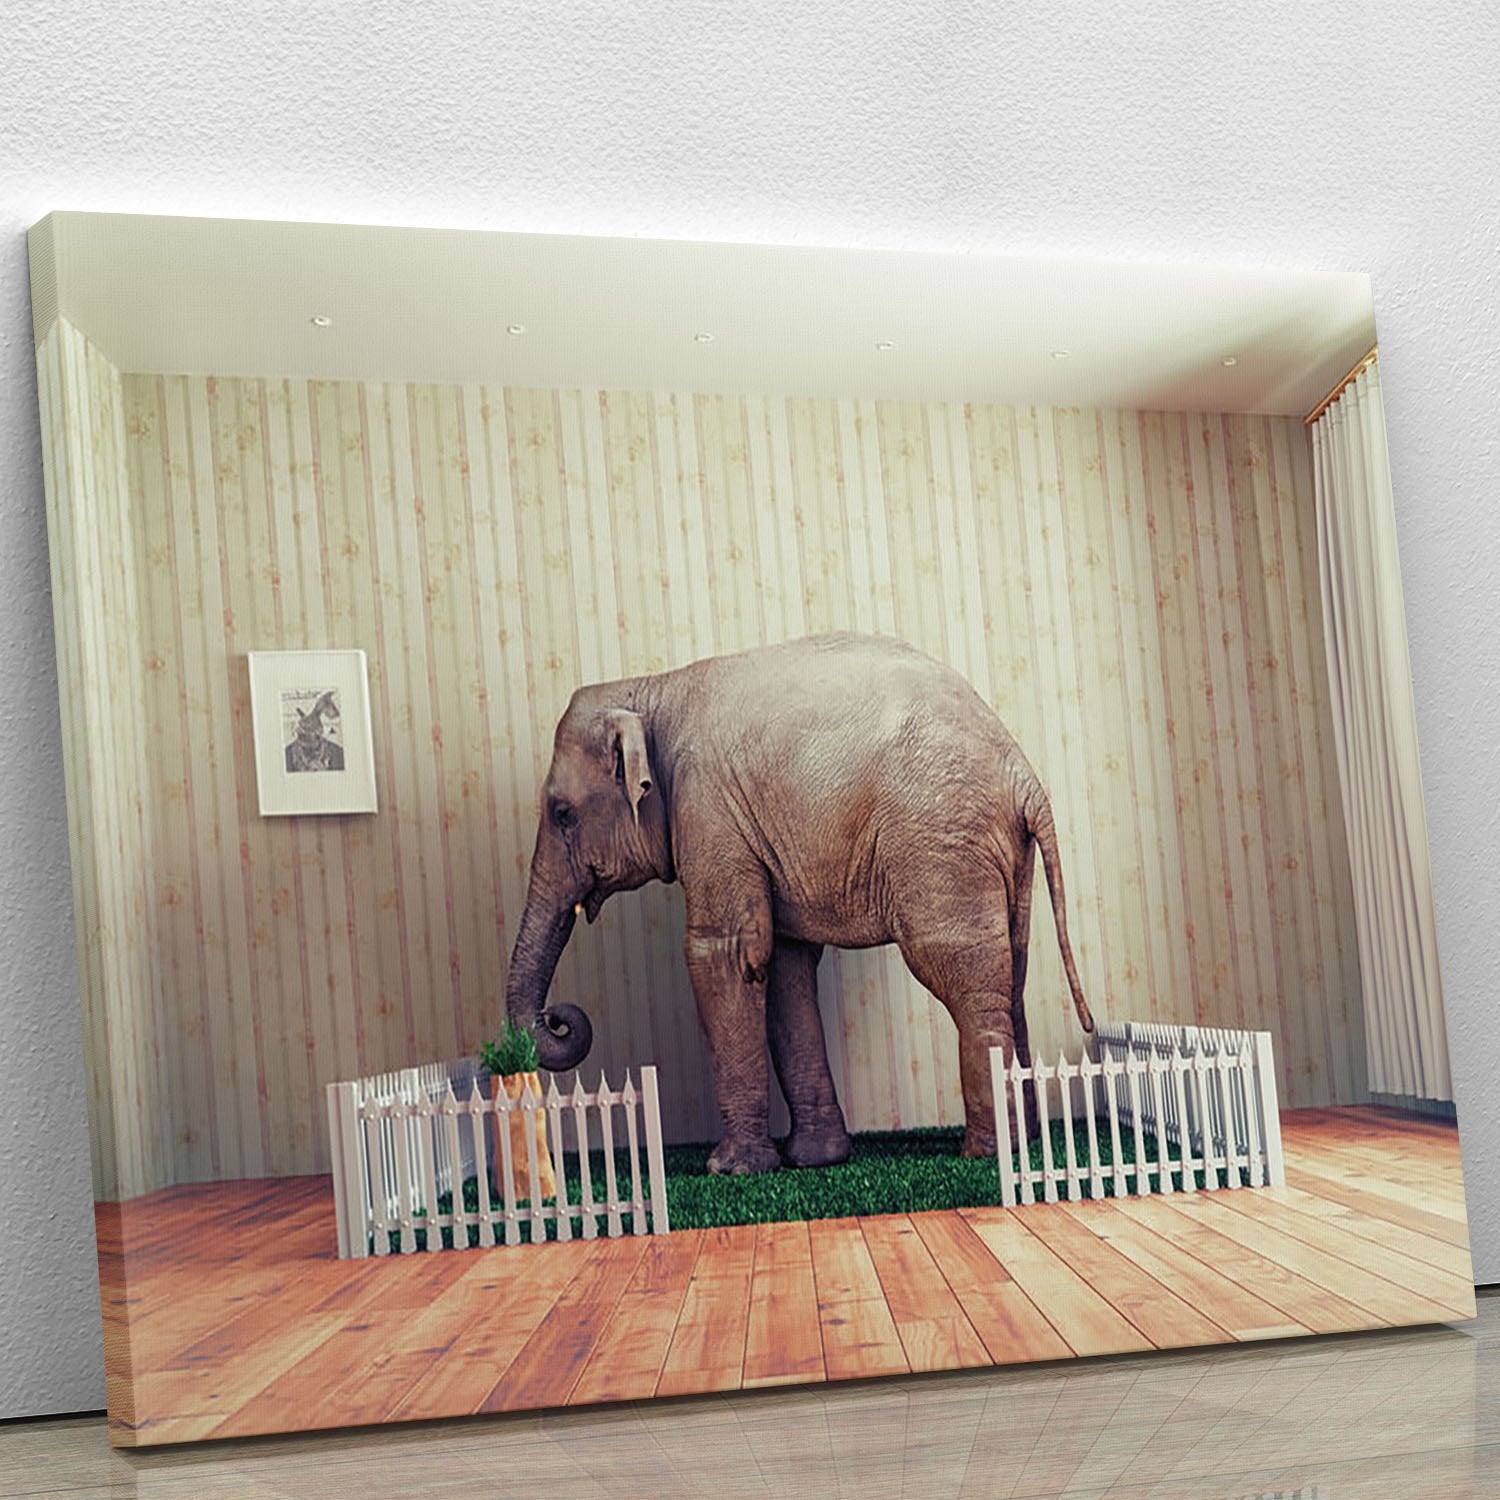 An Elephant calf as the pet Canvas Print or Poster